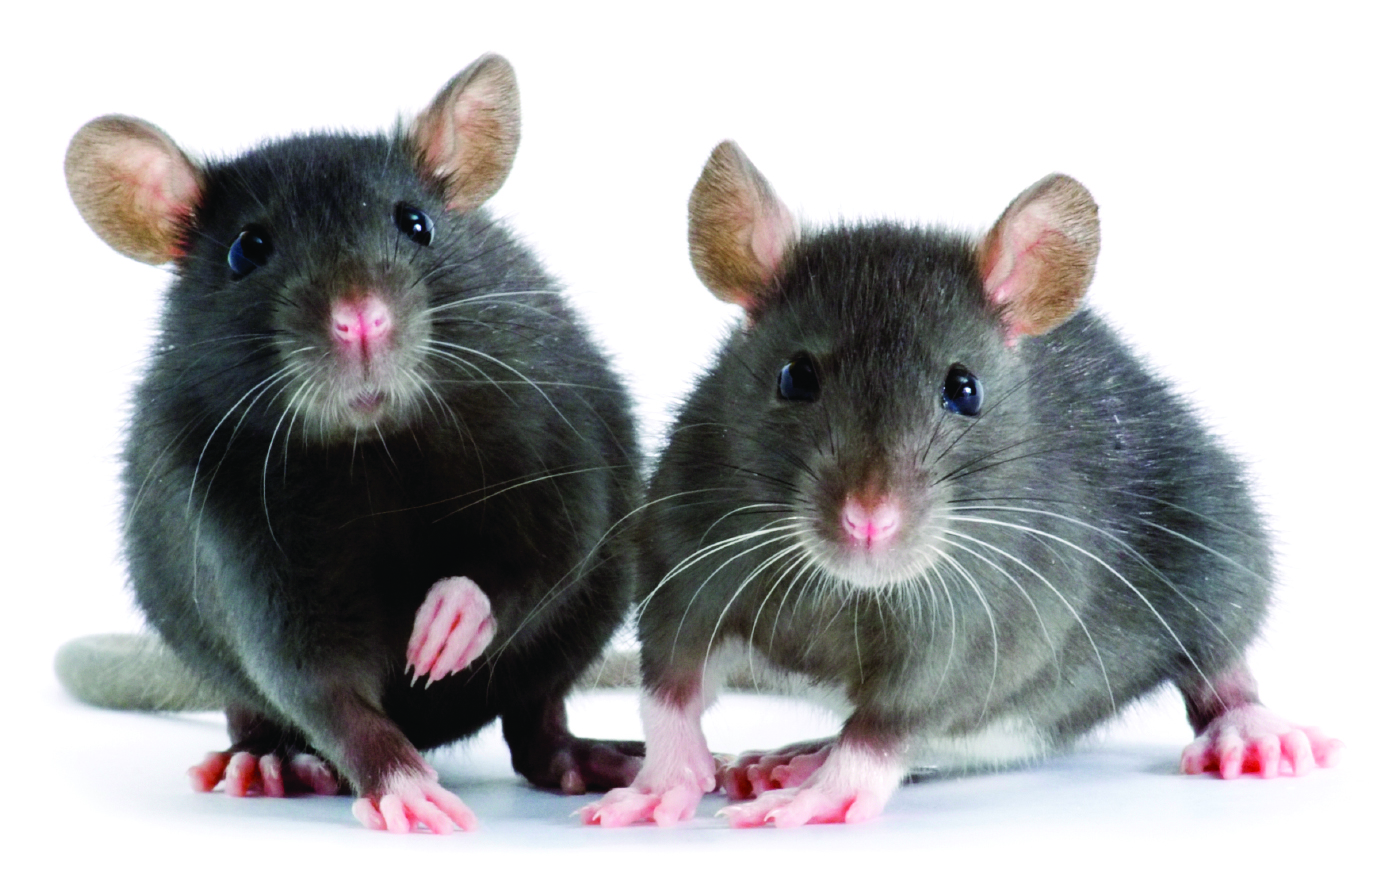 Winter Weather Forces Rodents and Other Pests Indoors